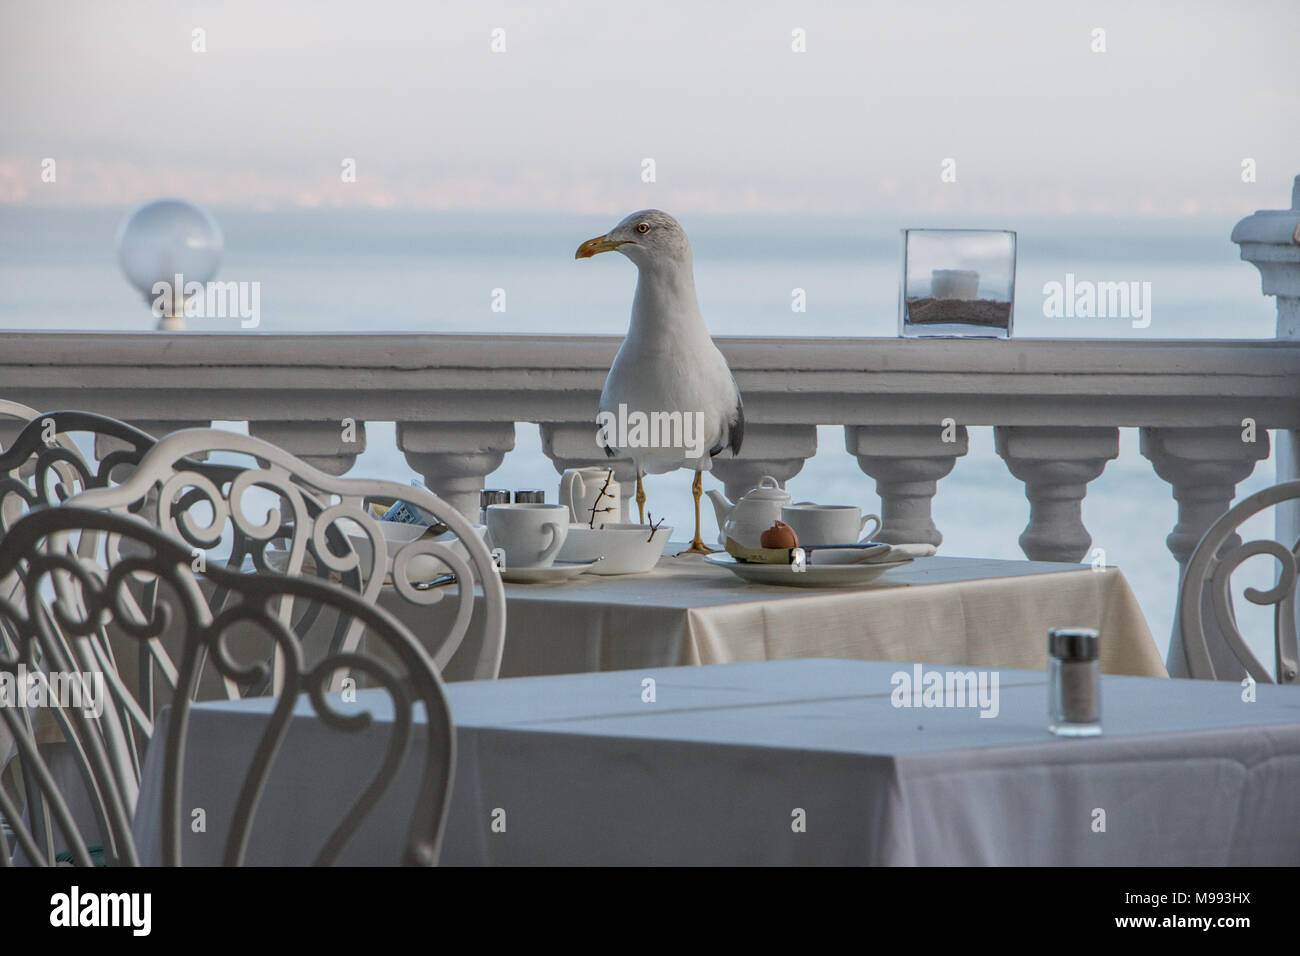 Seagull standing on a seaside restaurant table Stock Photo